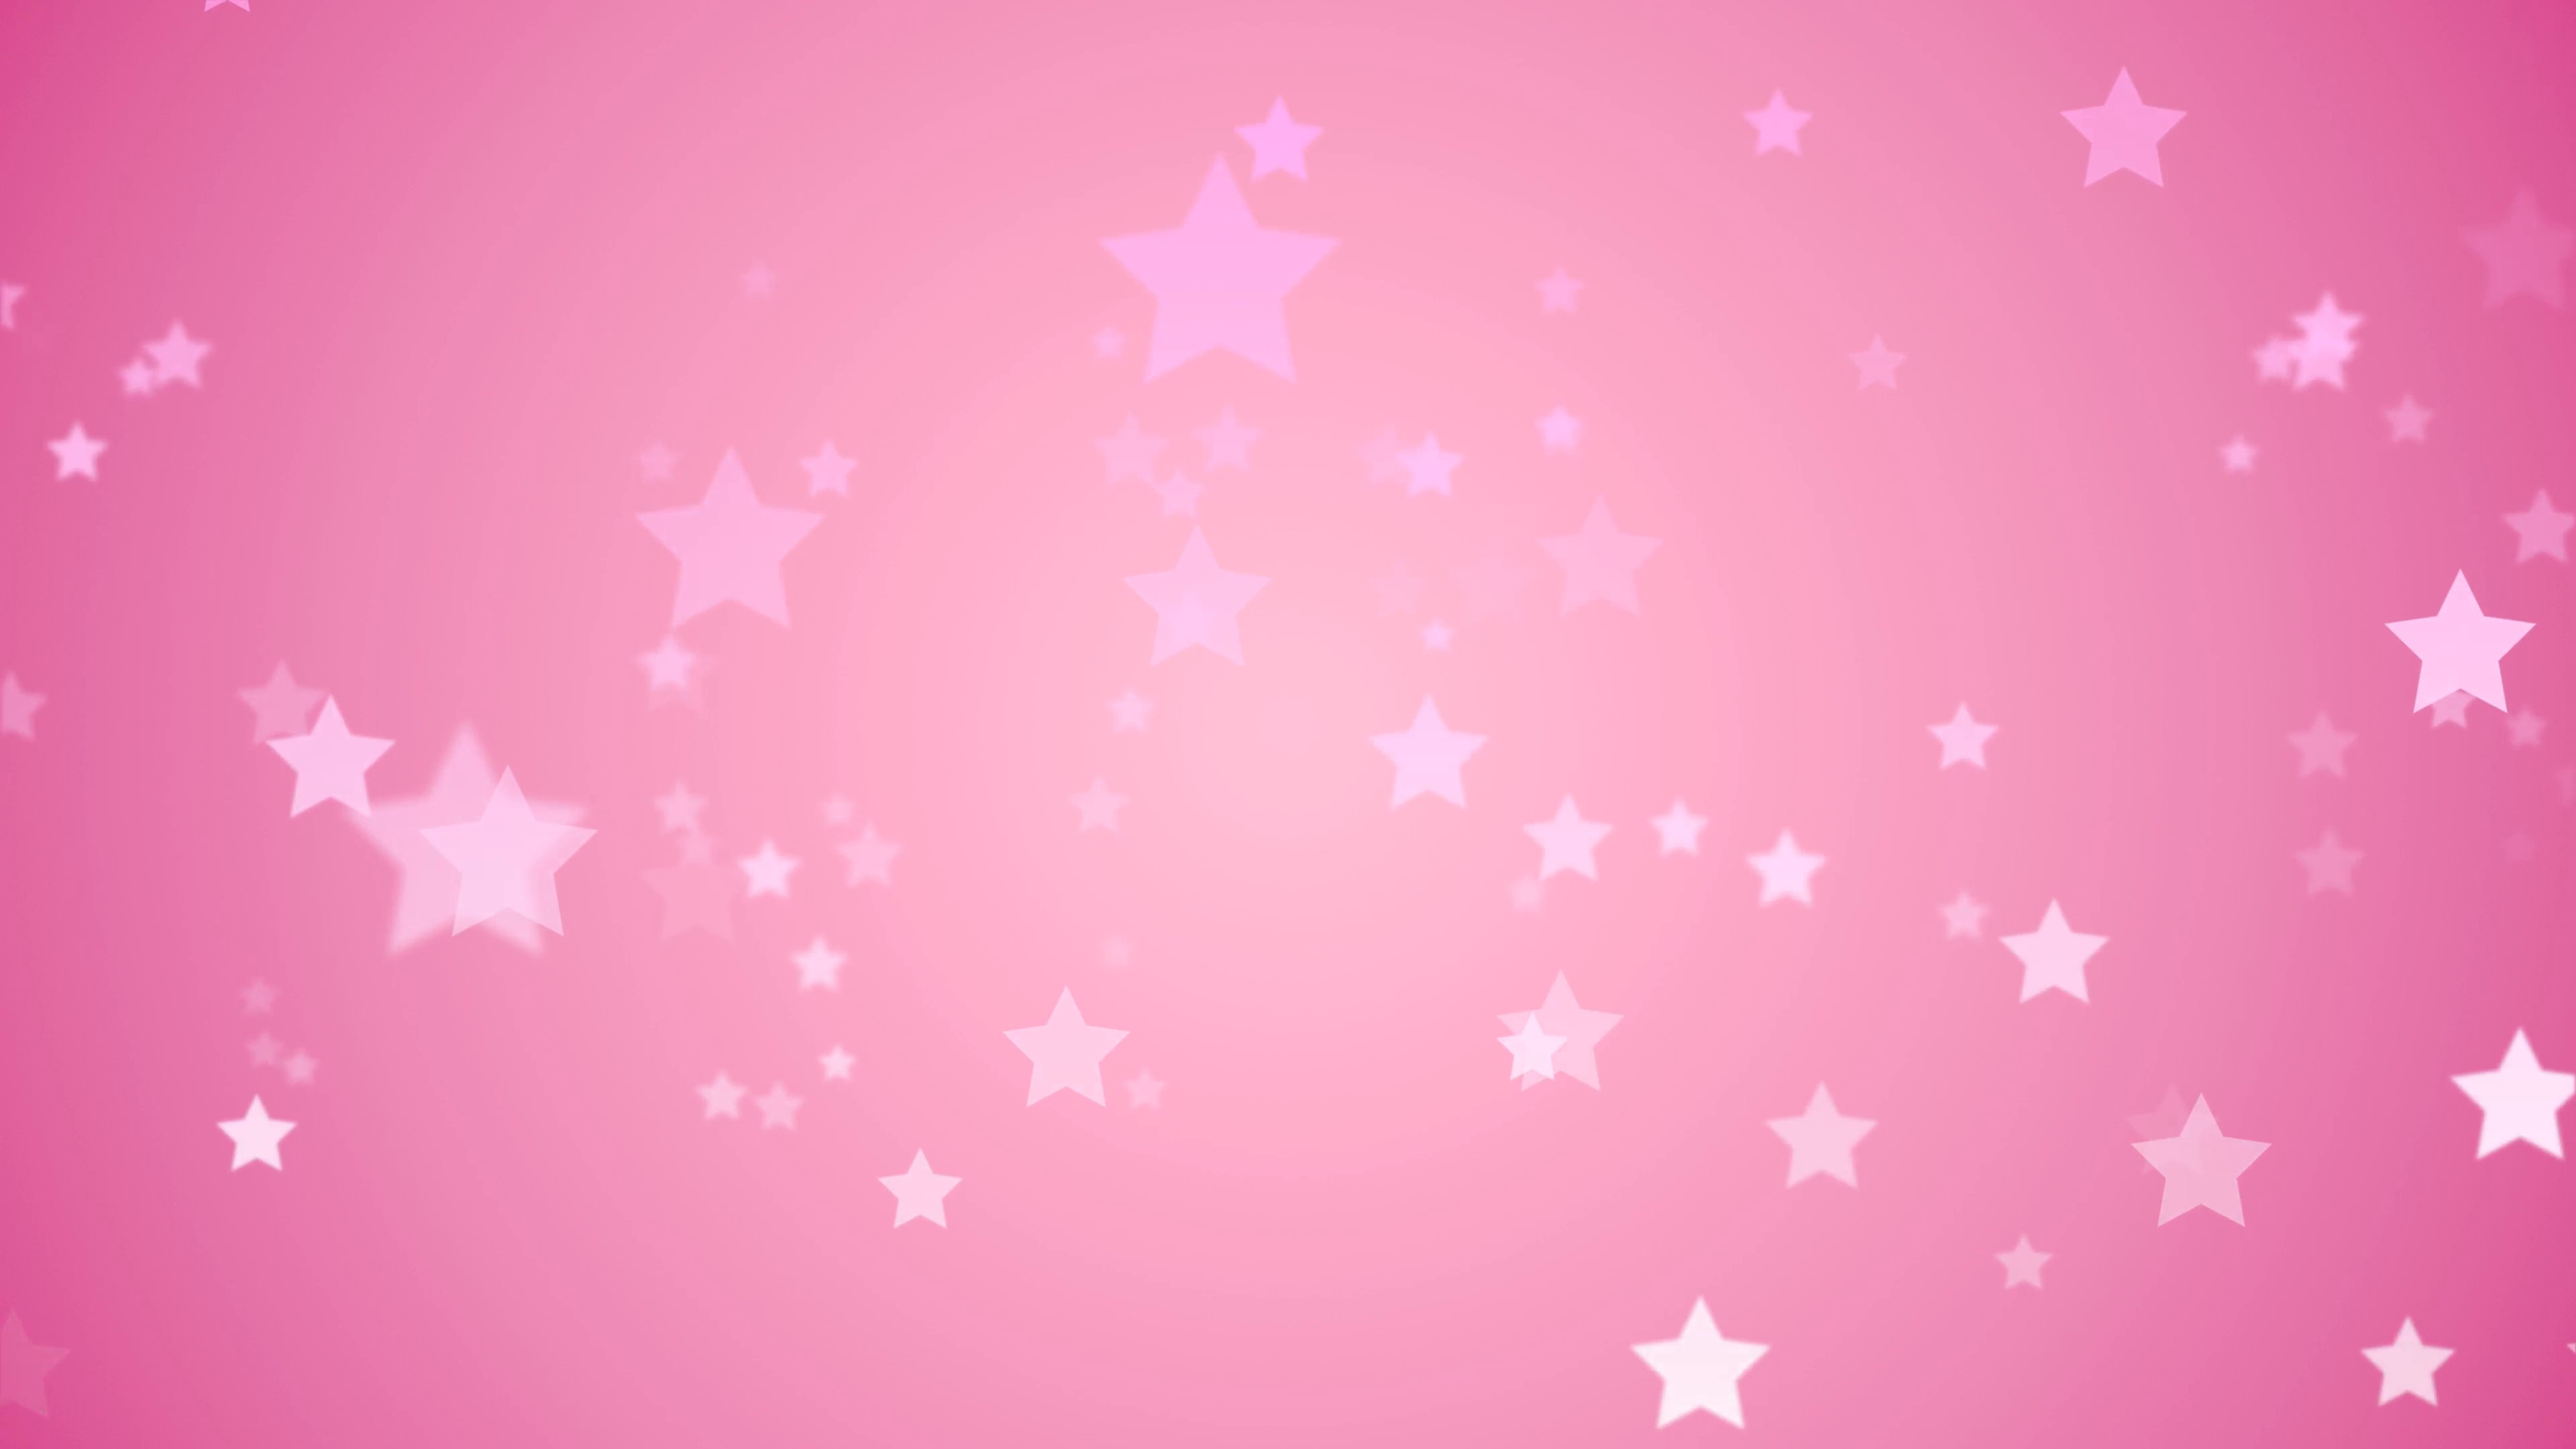 35 High Definition Pink Wallpapers/Backgrounds For Free ...